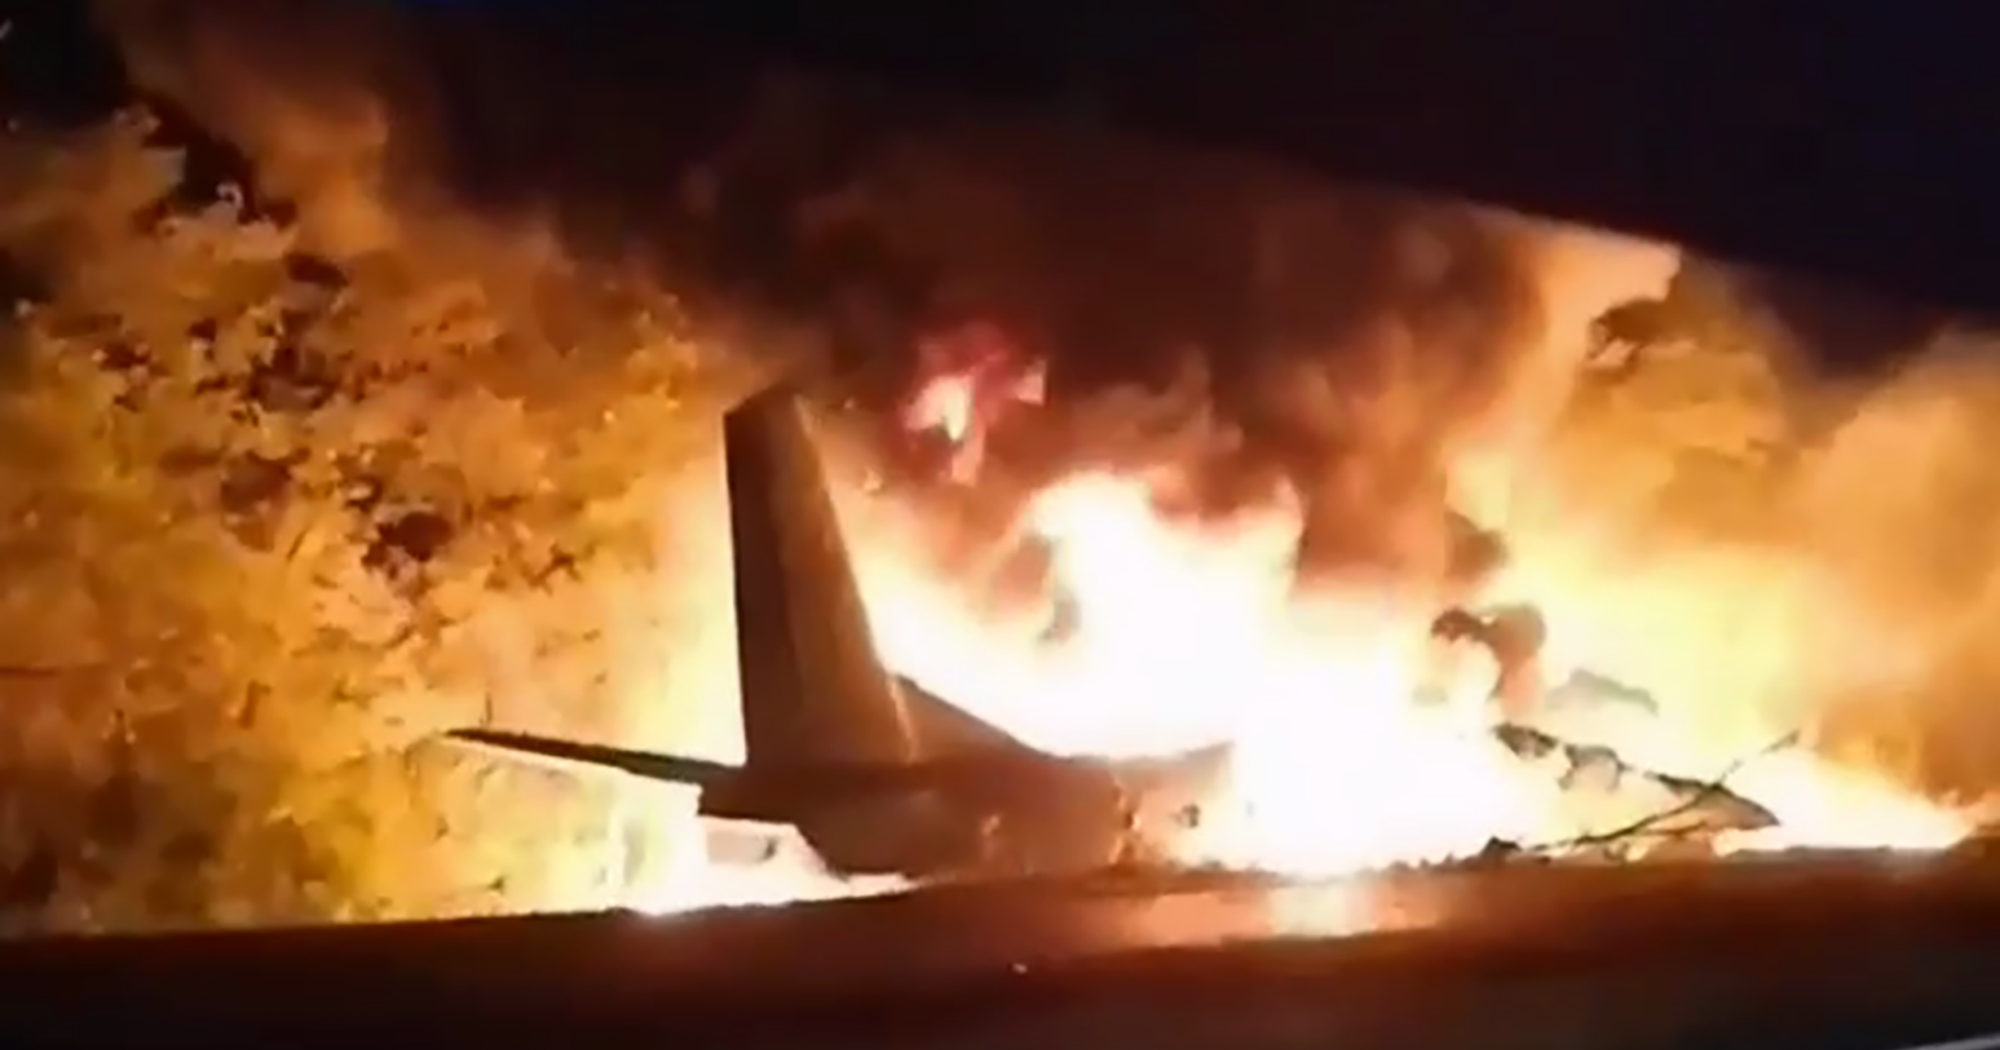 In this image from footage released by Ukraine's Emergency Situation Ministry, an AN-26 military plane bursts into flames after crashing in the town of Chuguyiv, Ukraine, on Sept. 25, 2020. Twenty-six people were killed.